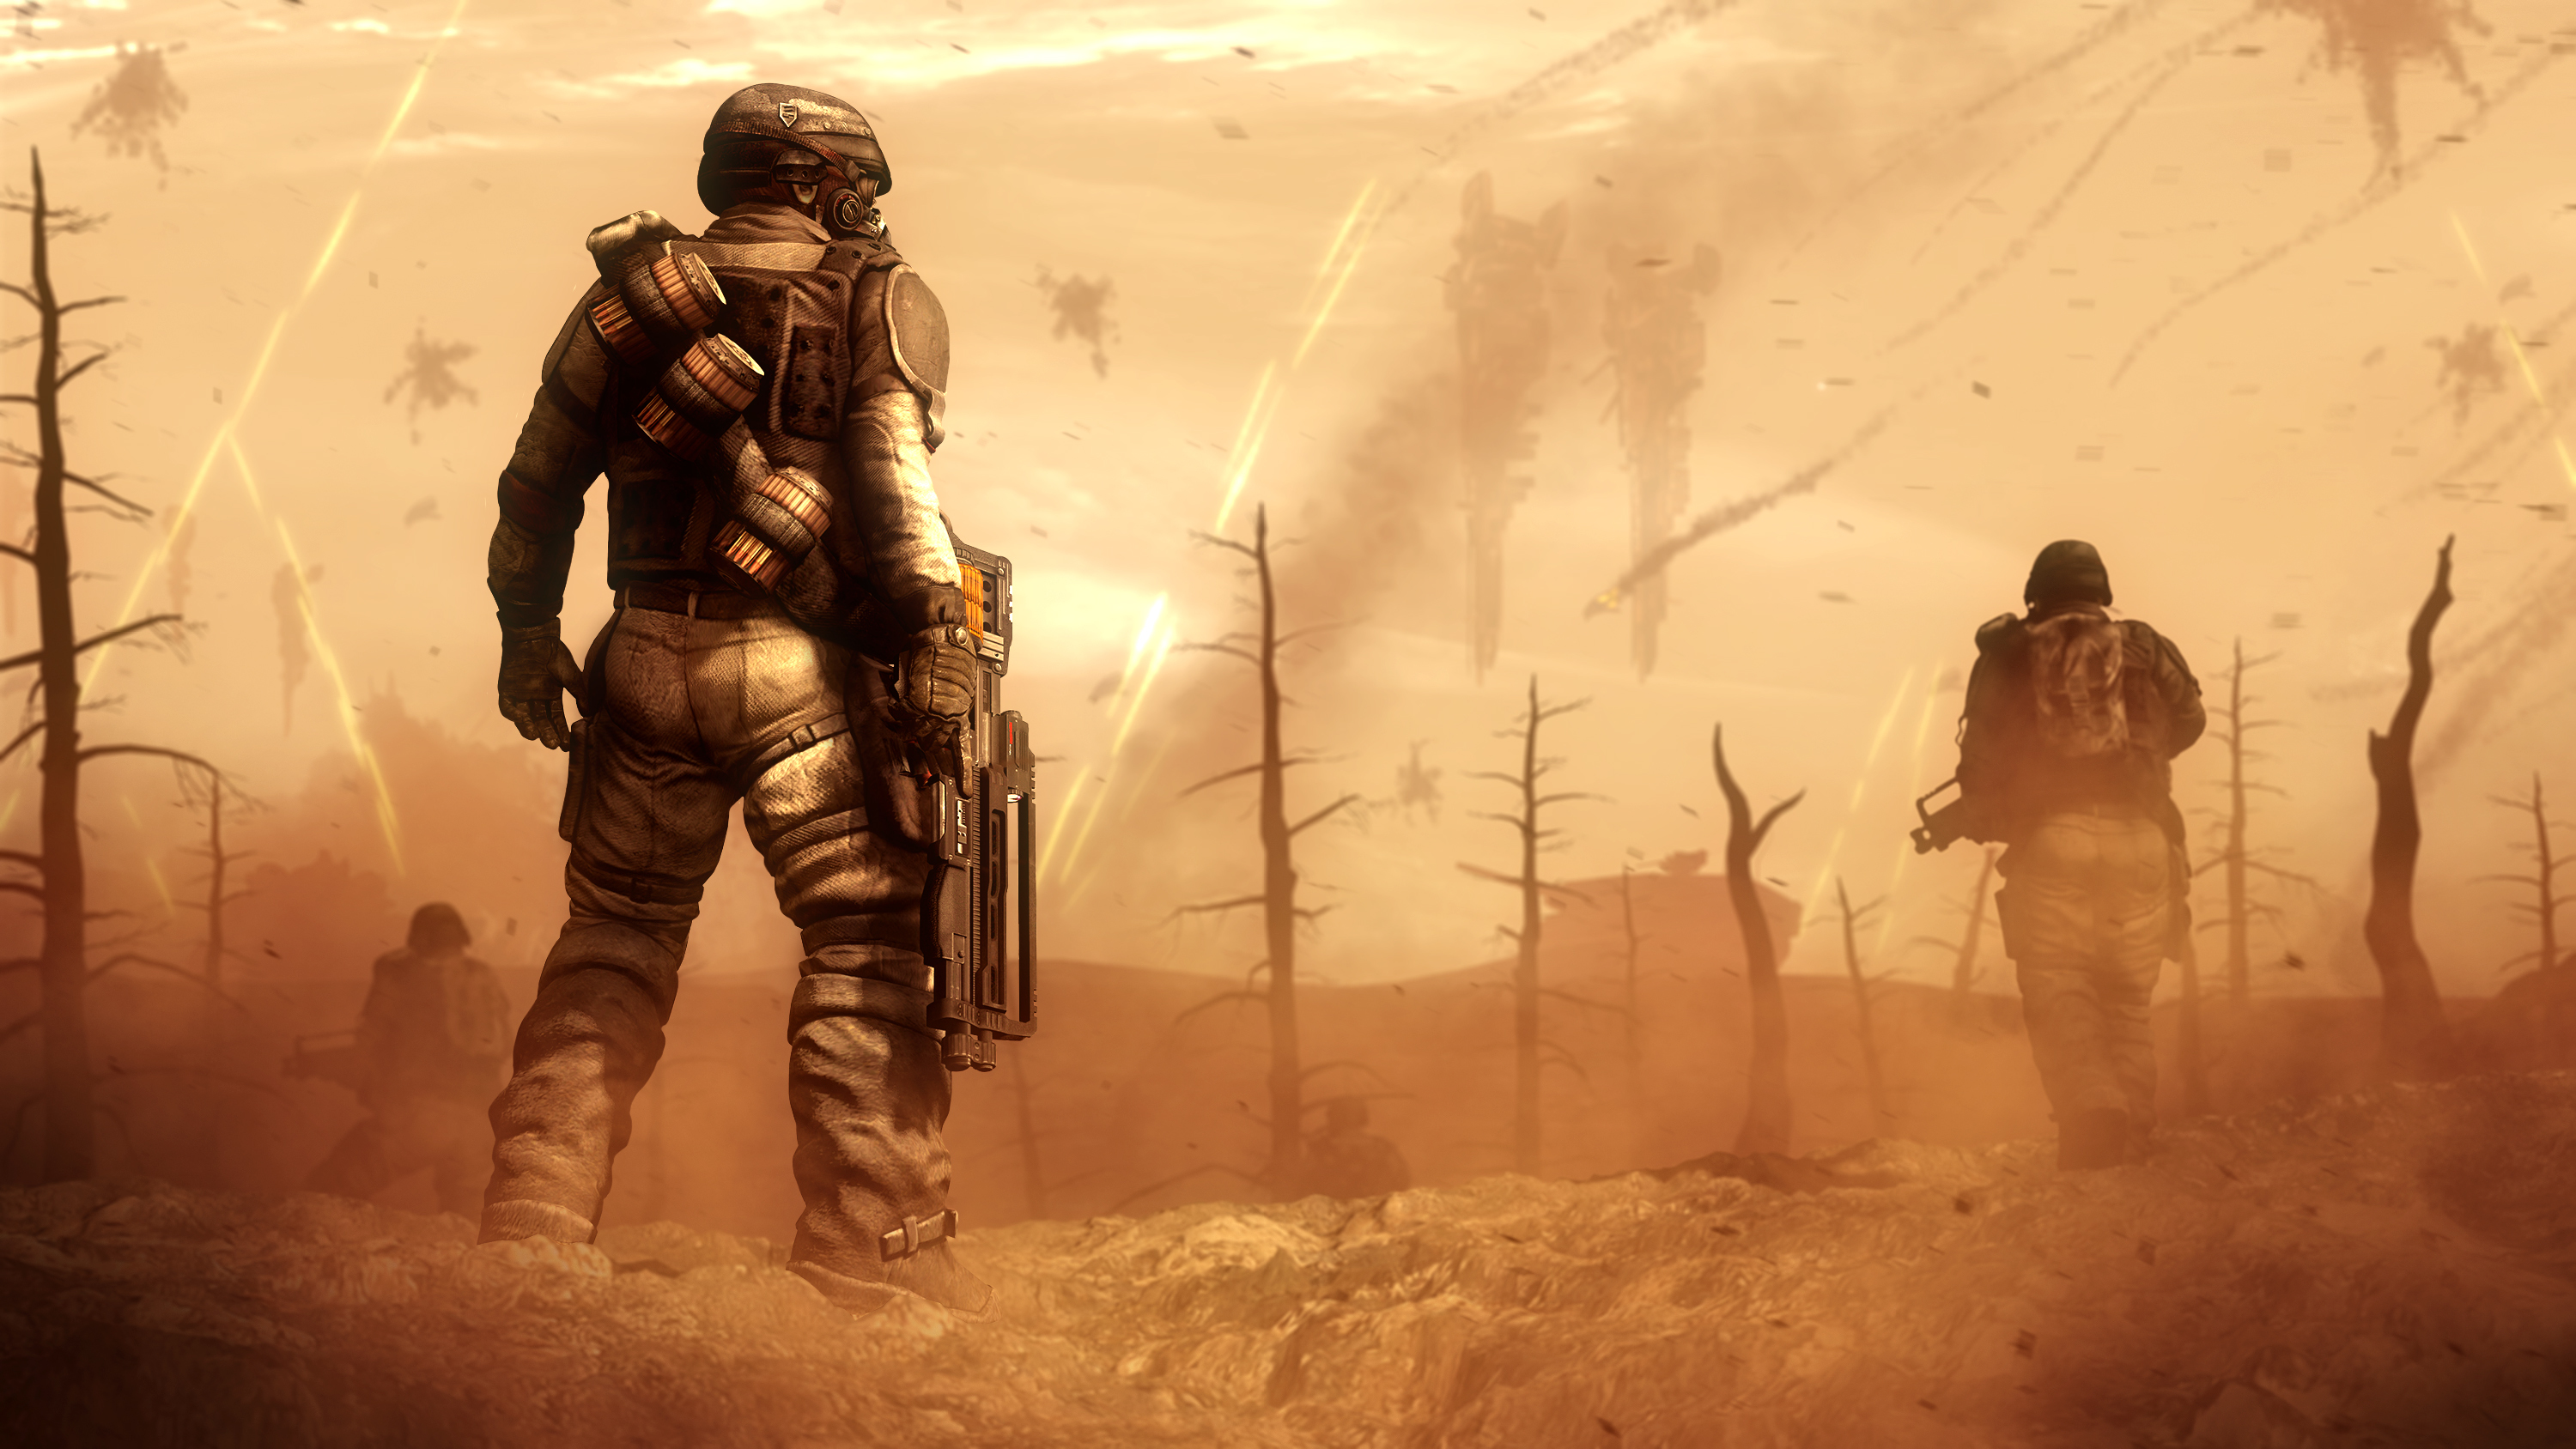 video game, wasteland, post apocalyptic, soldier